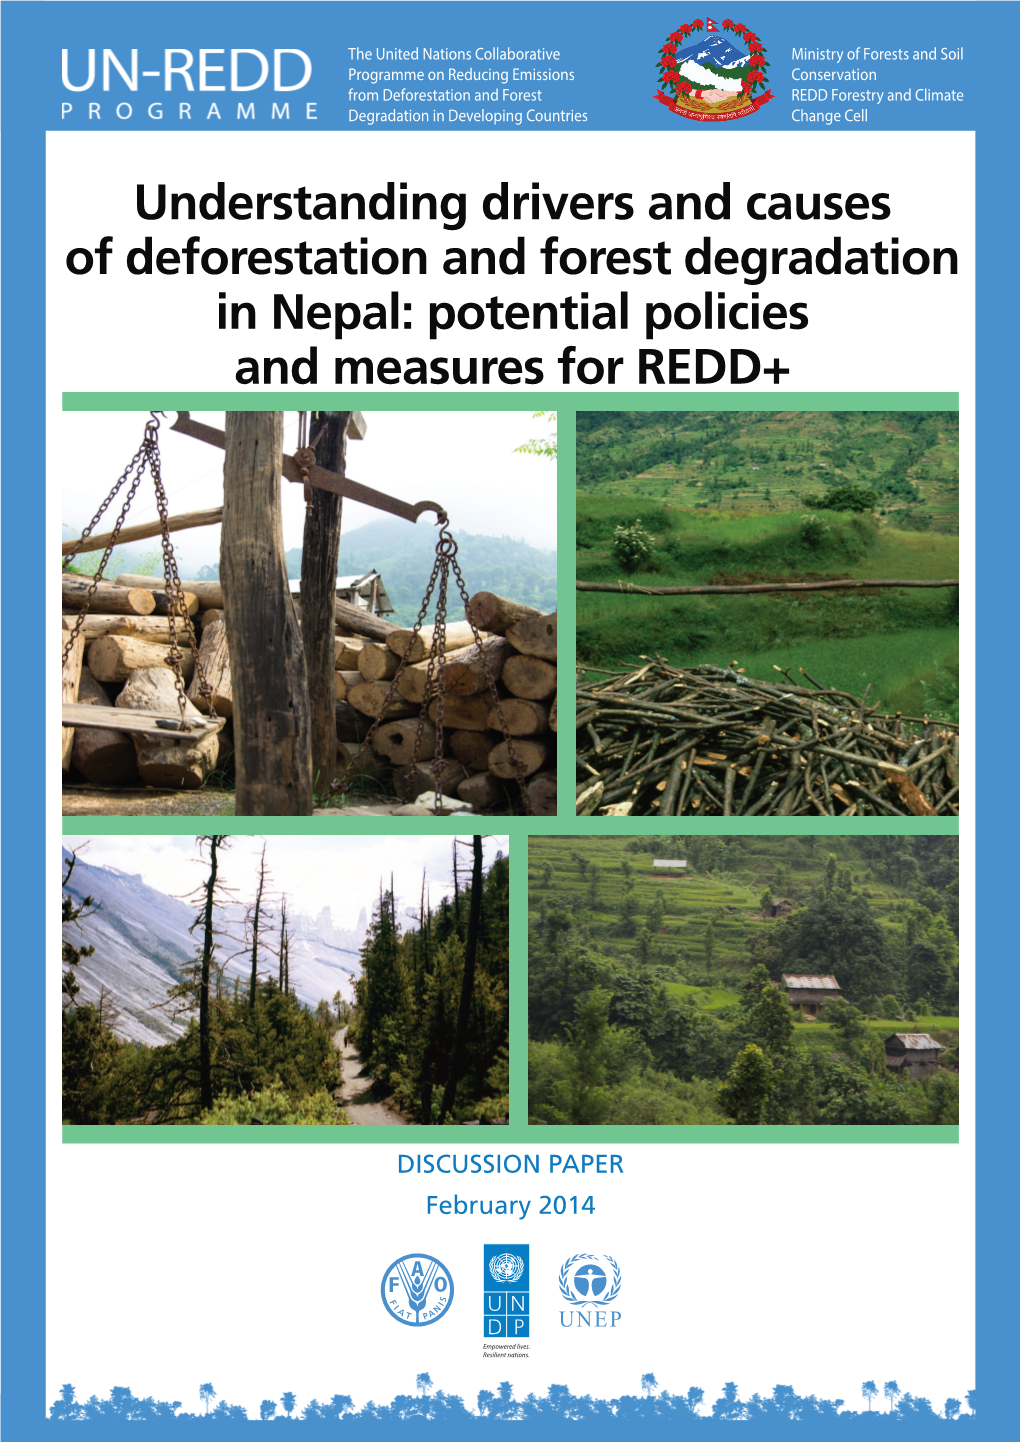 Nepal: Potential Policies and Measures for REDD+